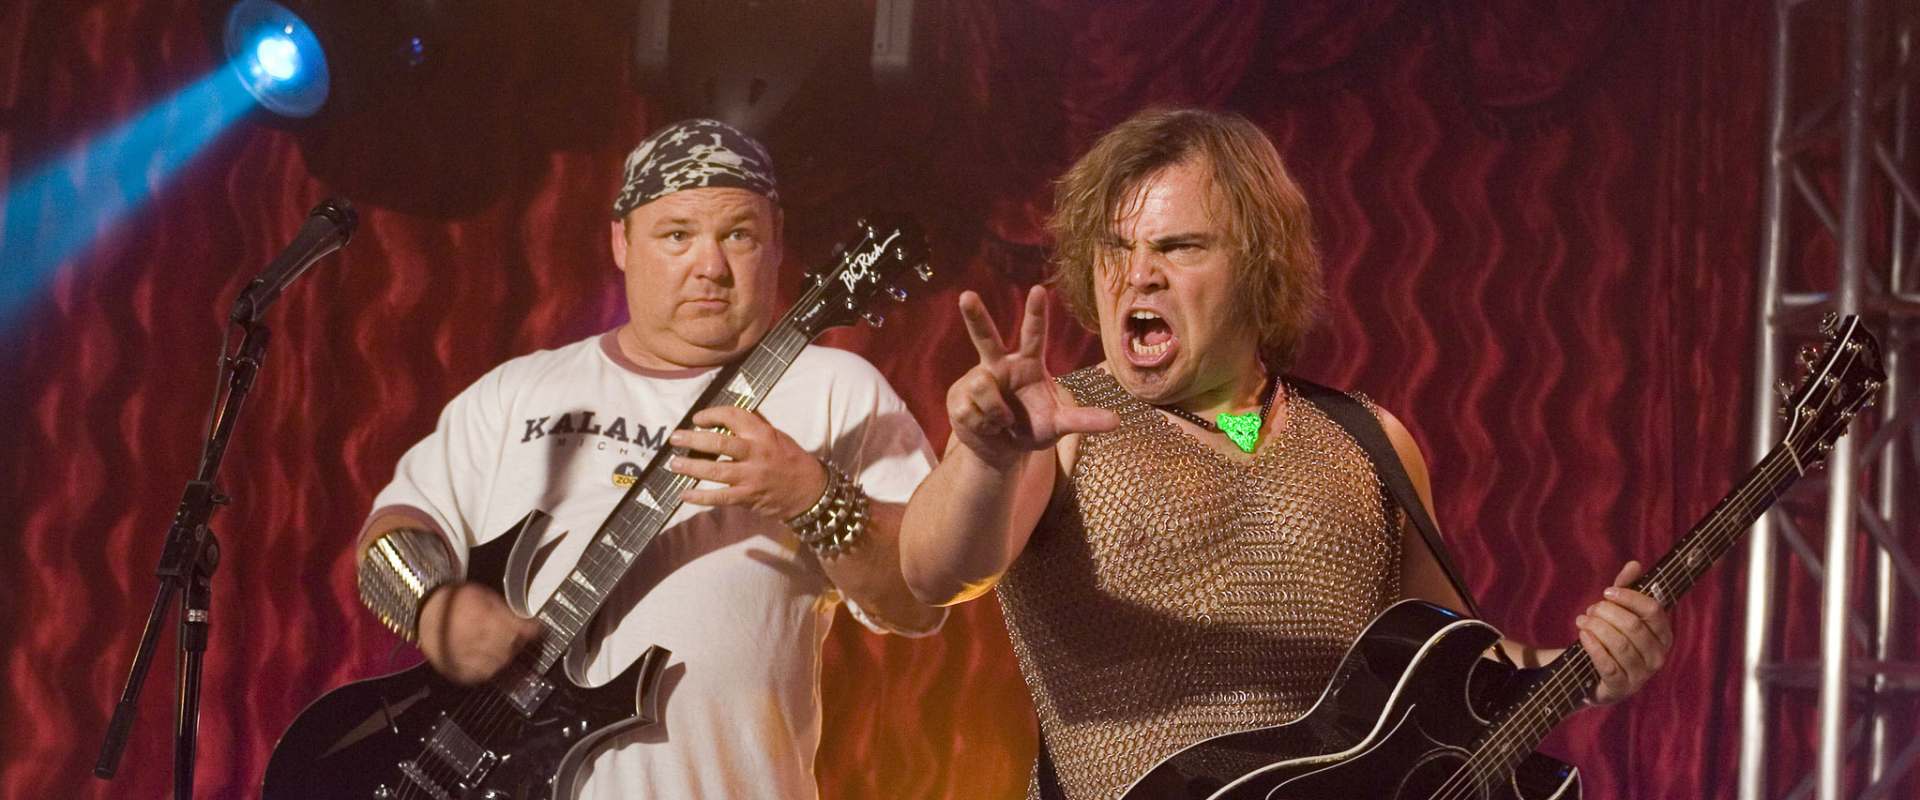 Tenacious D in The Pick of Destiny background 1